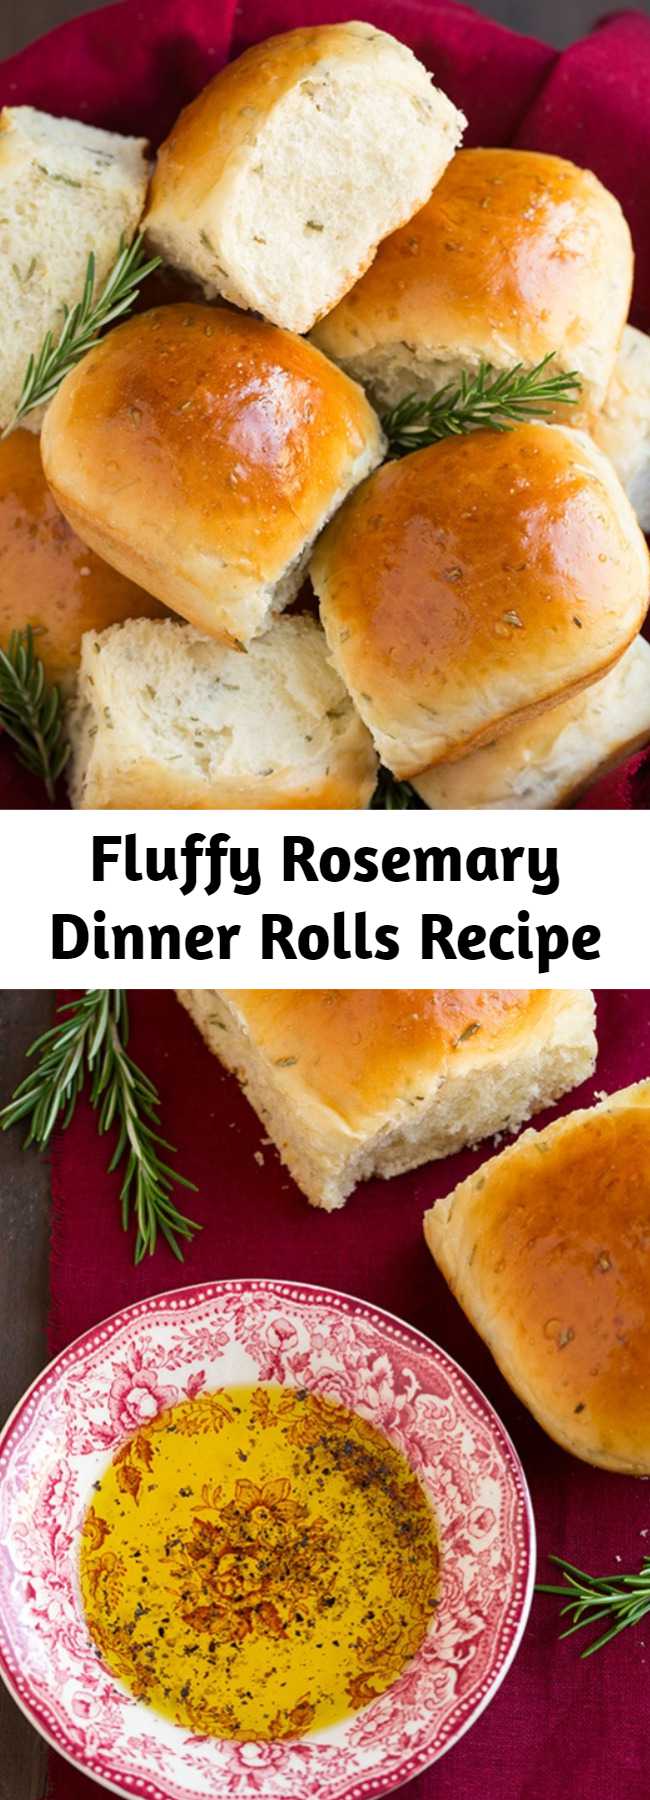 Fluffy Rosemary Dinner Rolls Recipe - The perfect roll recipe for the holidays! Soft and fluffy and deliciously flavored with fresh rosemary.